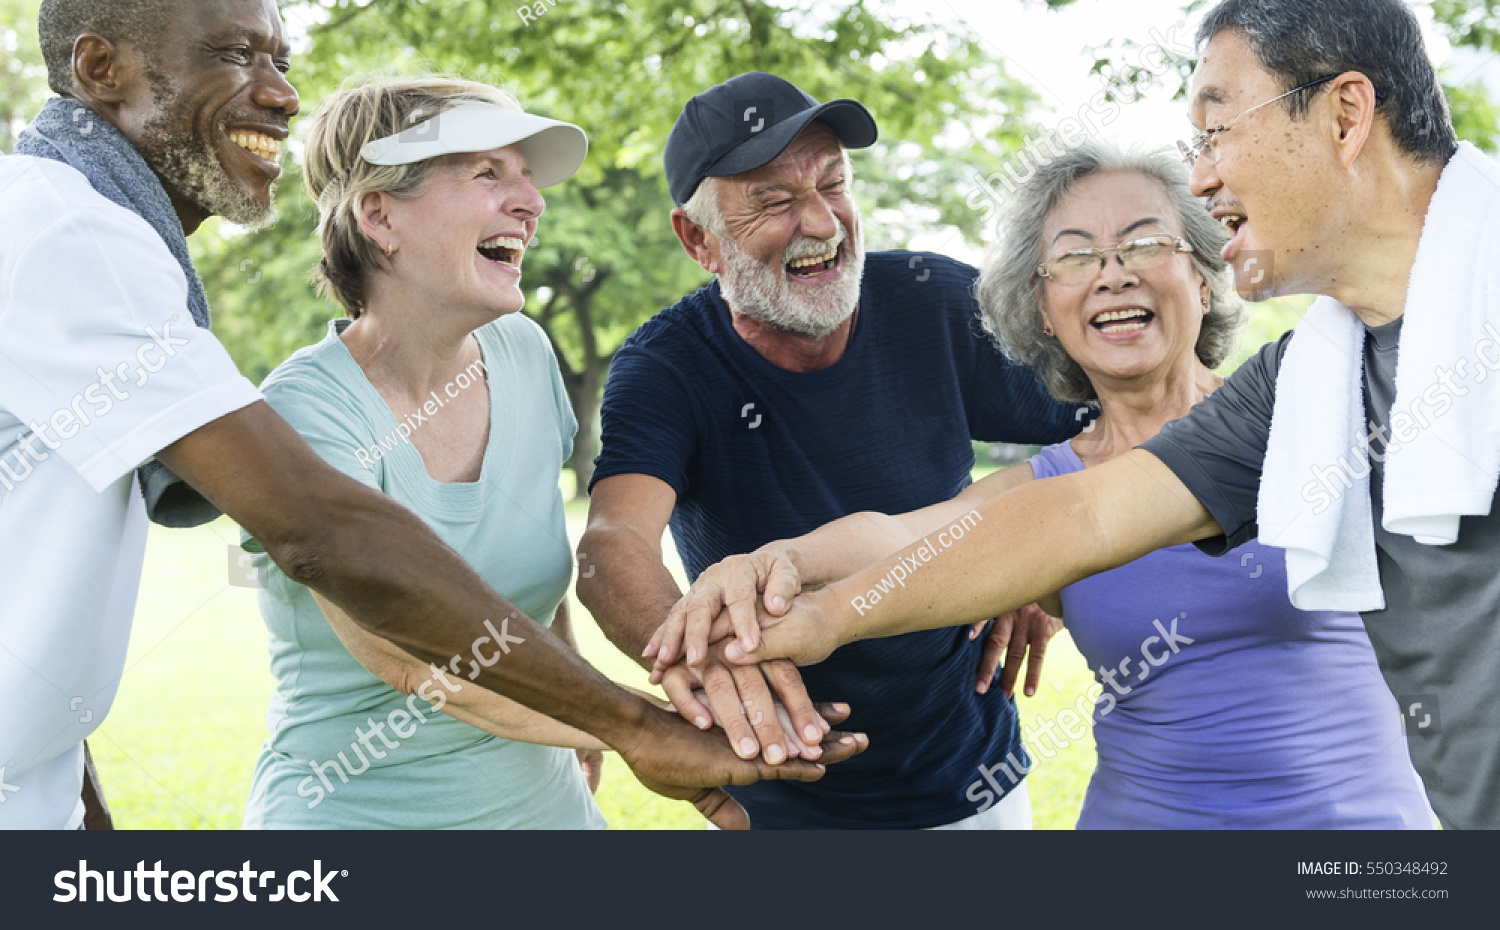 Group Of Senior Retirement Exercising Togetherness Concept #550348492